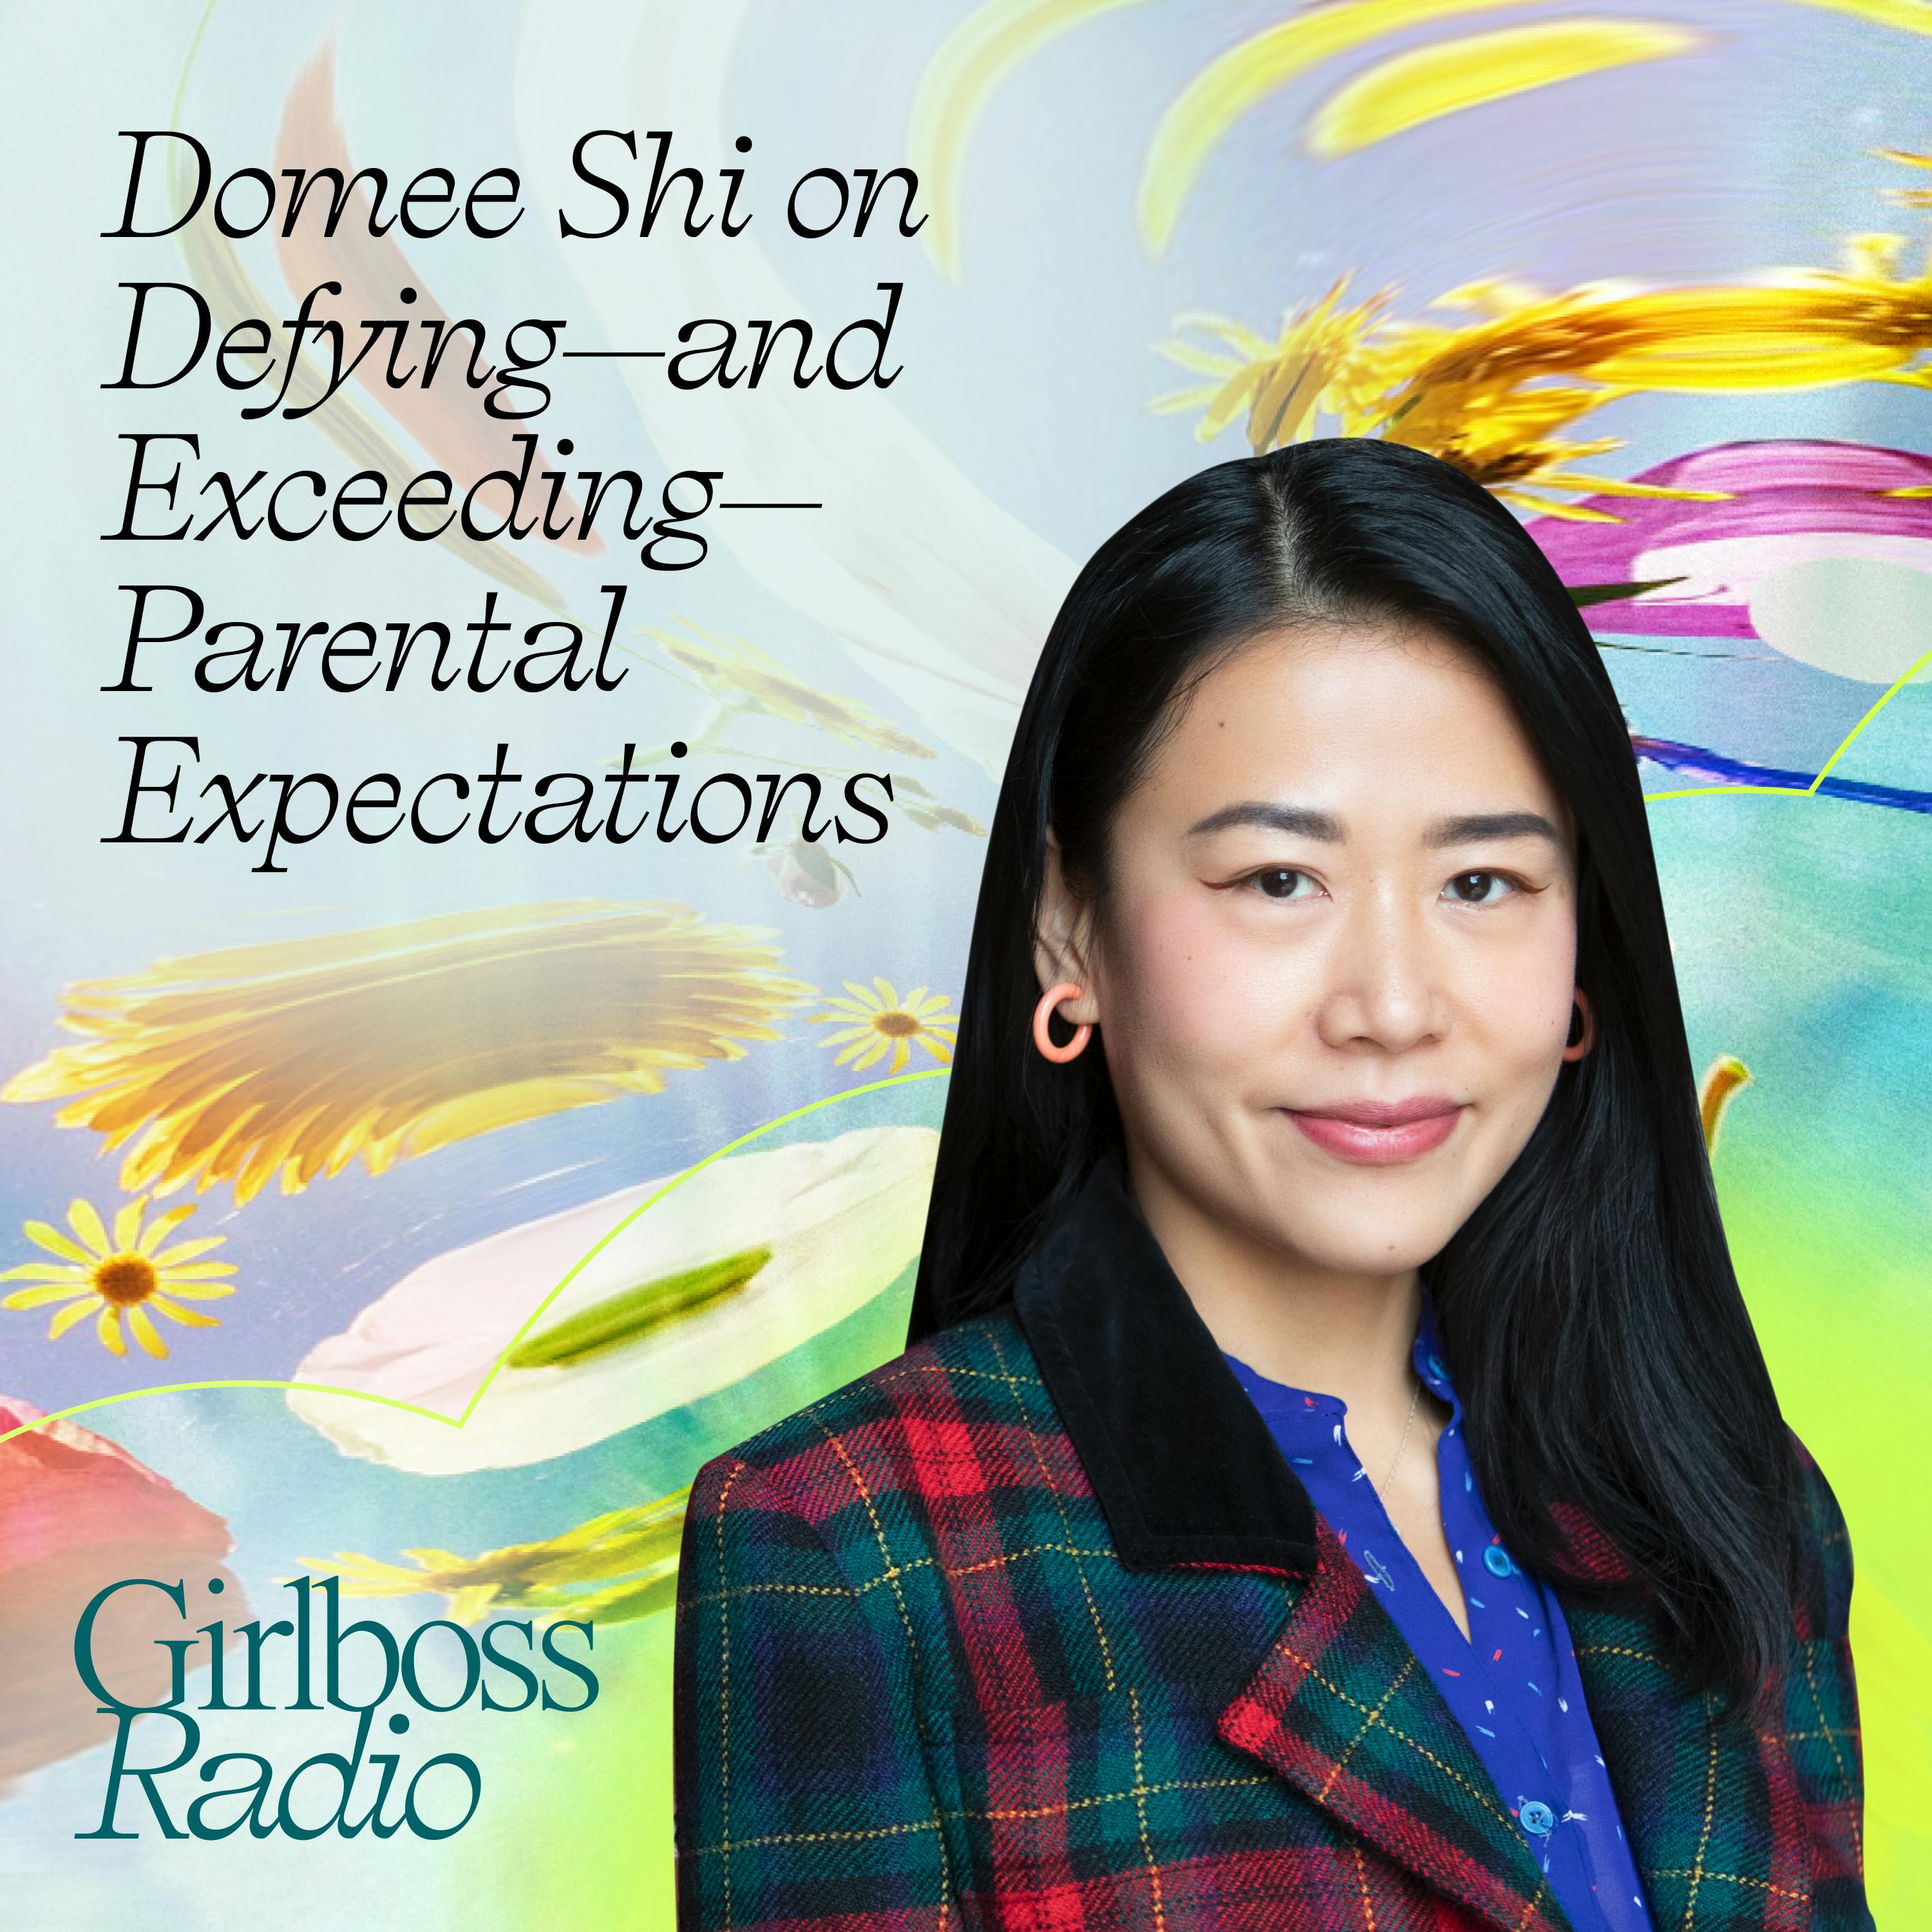 Domee Shi on Defying—and Exceeding—Parental Expectations